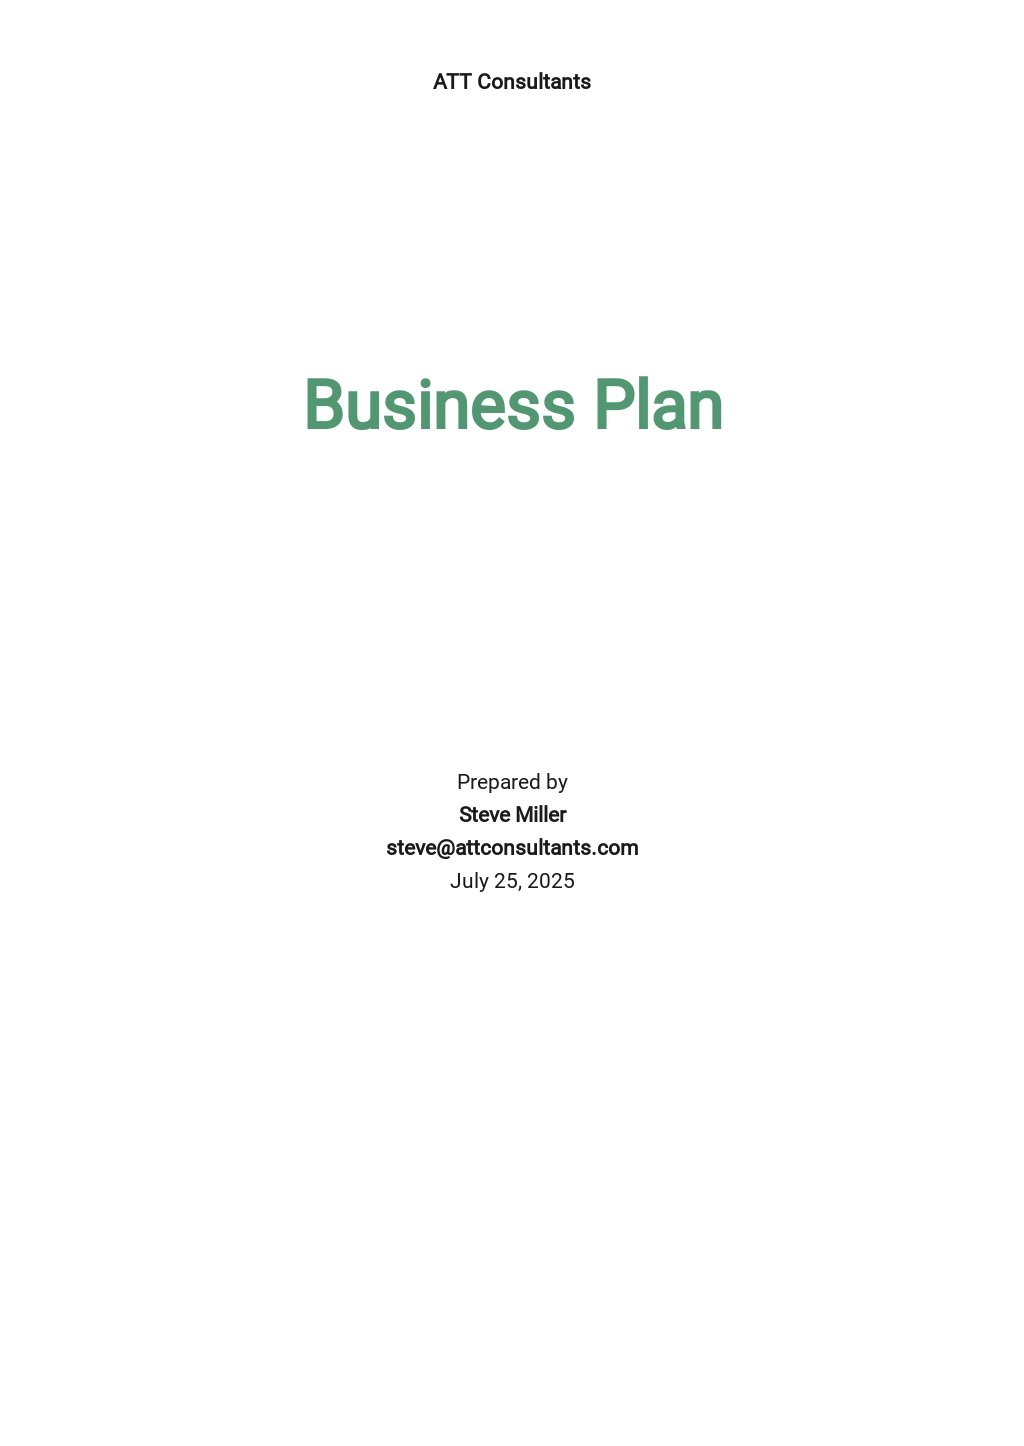 business plan for consulting firm pdf